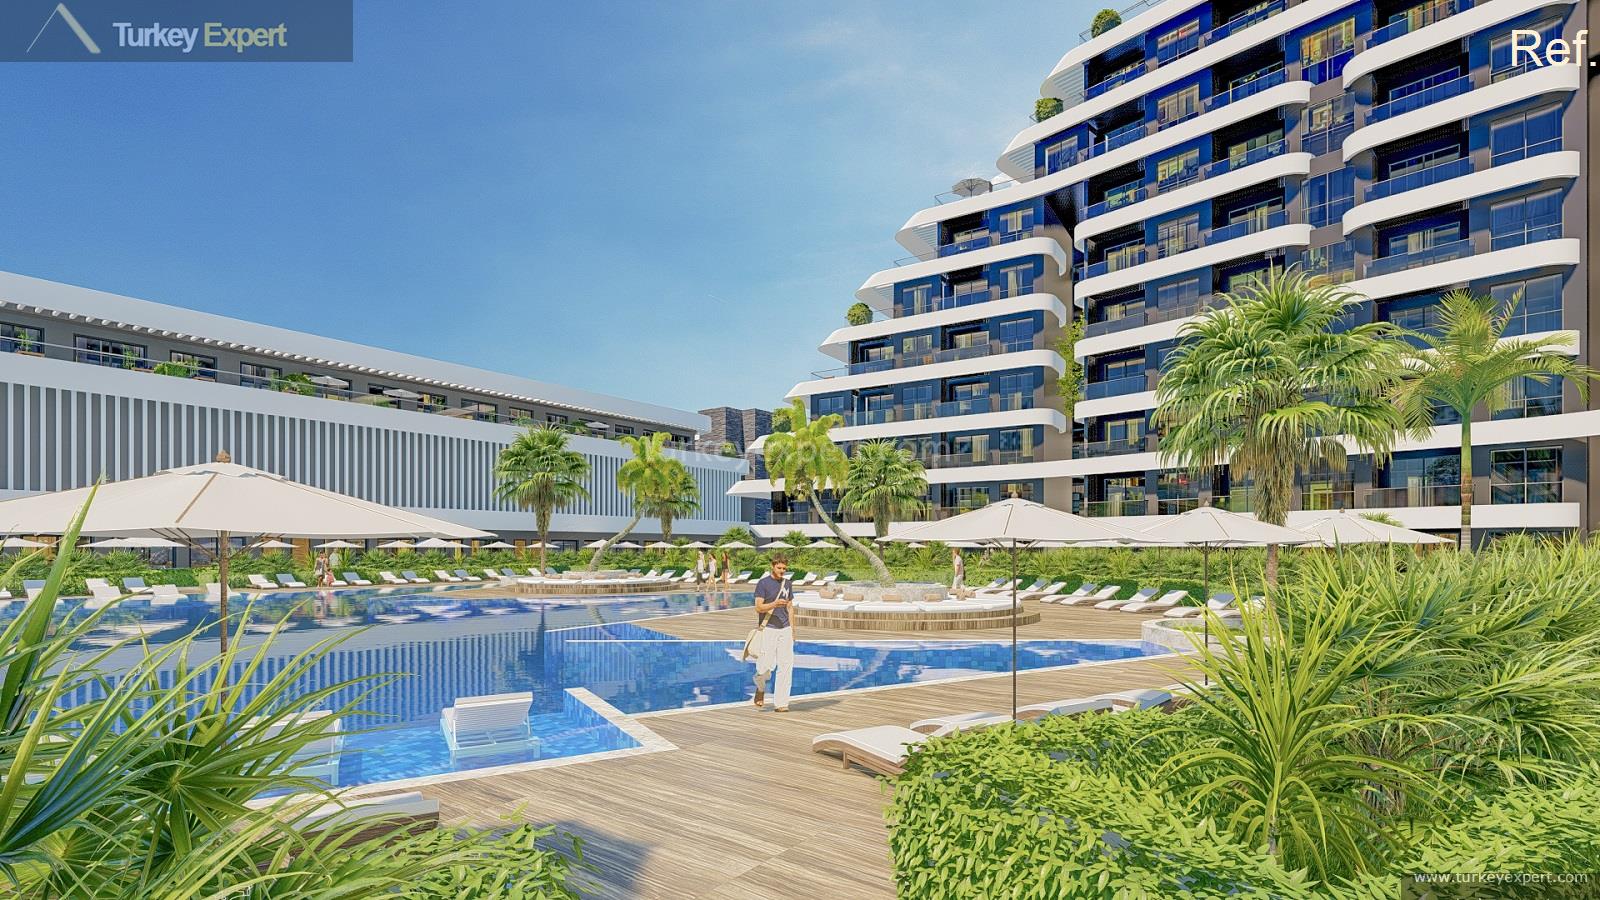 103topnotch residential project with private beach in antalya altintas12_midpageimg_